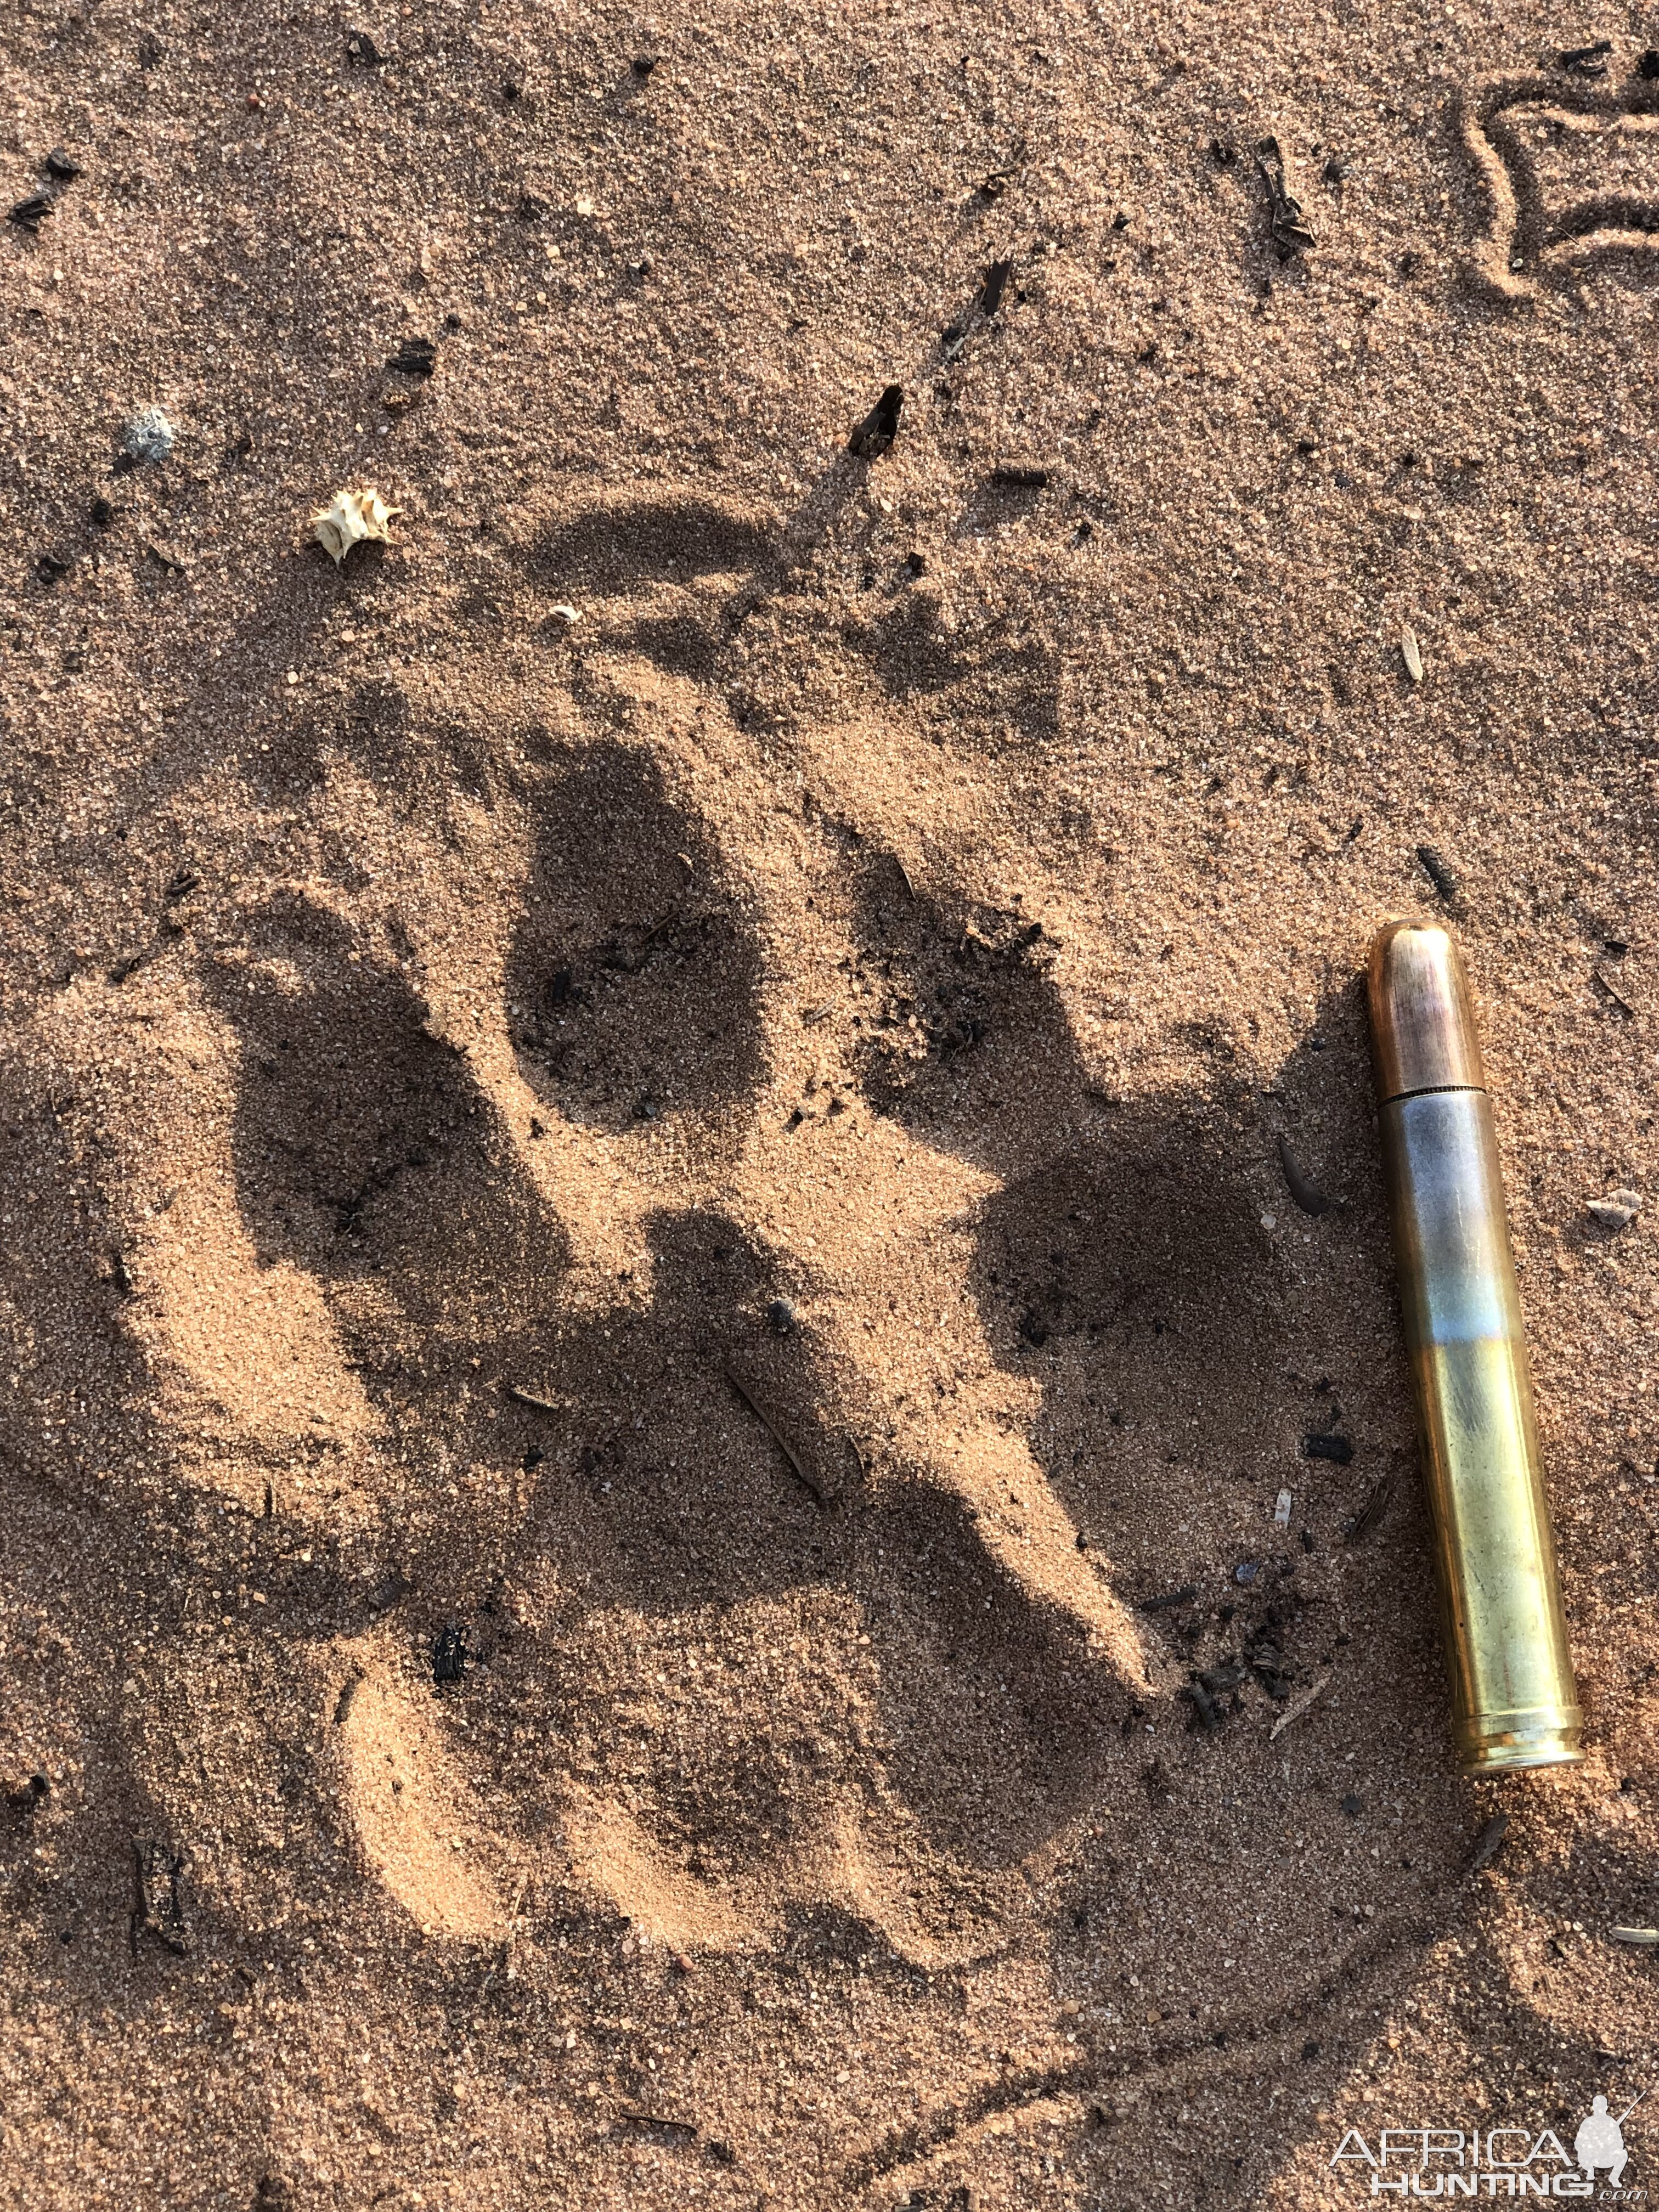 Leopard Track South Africa